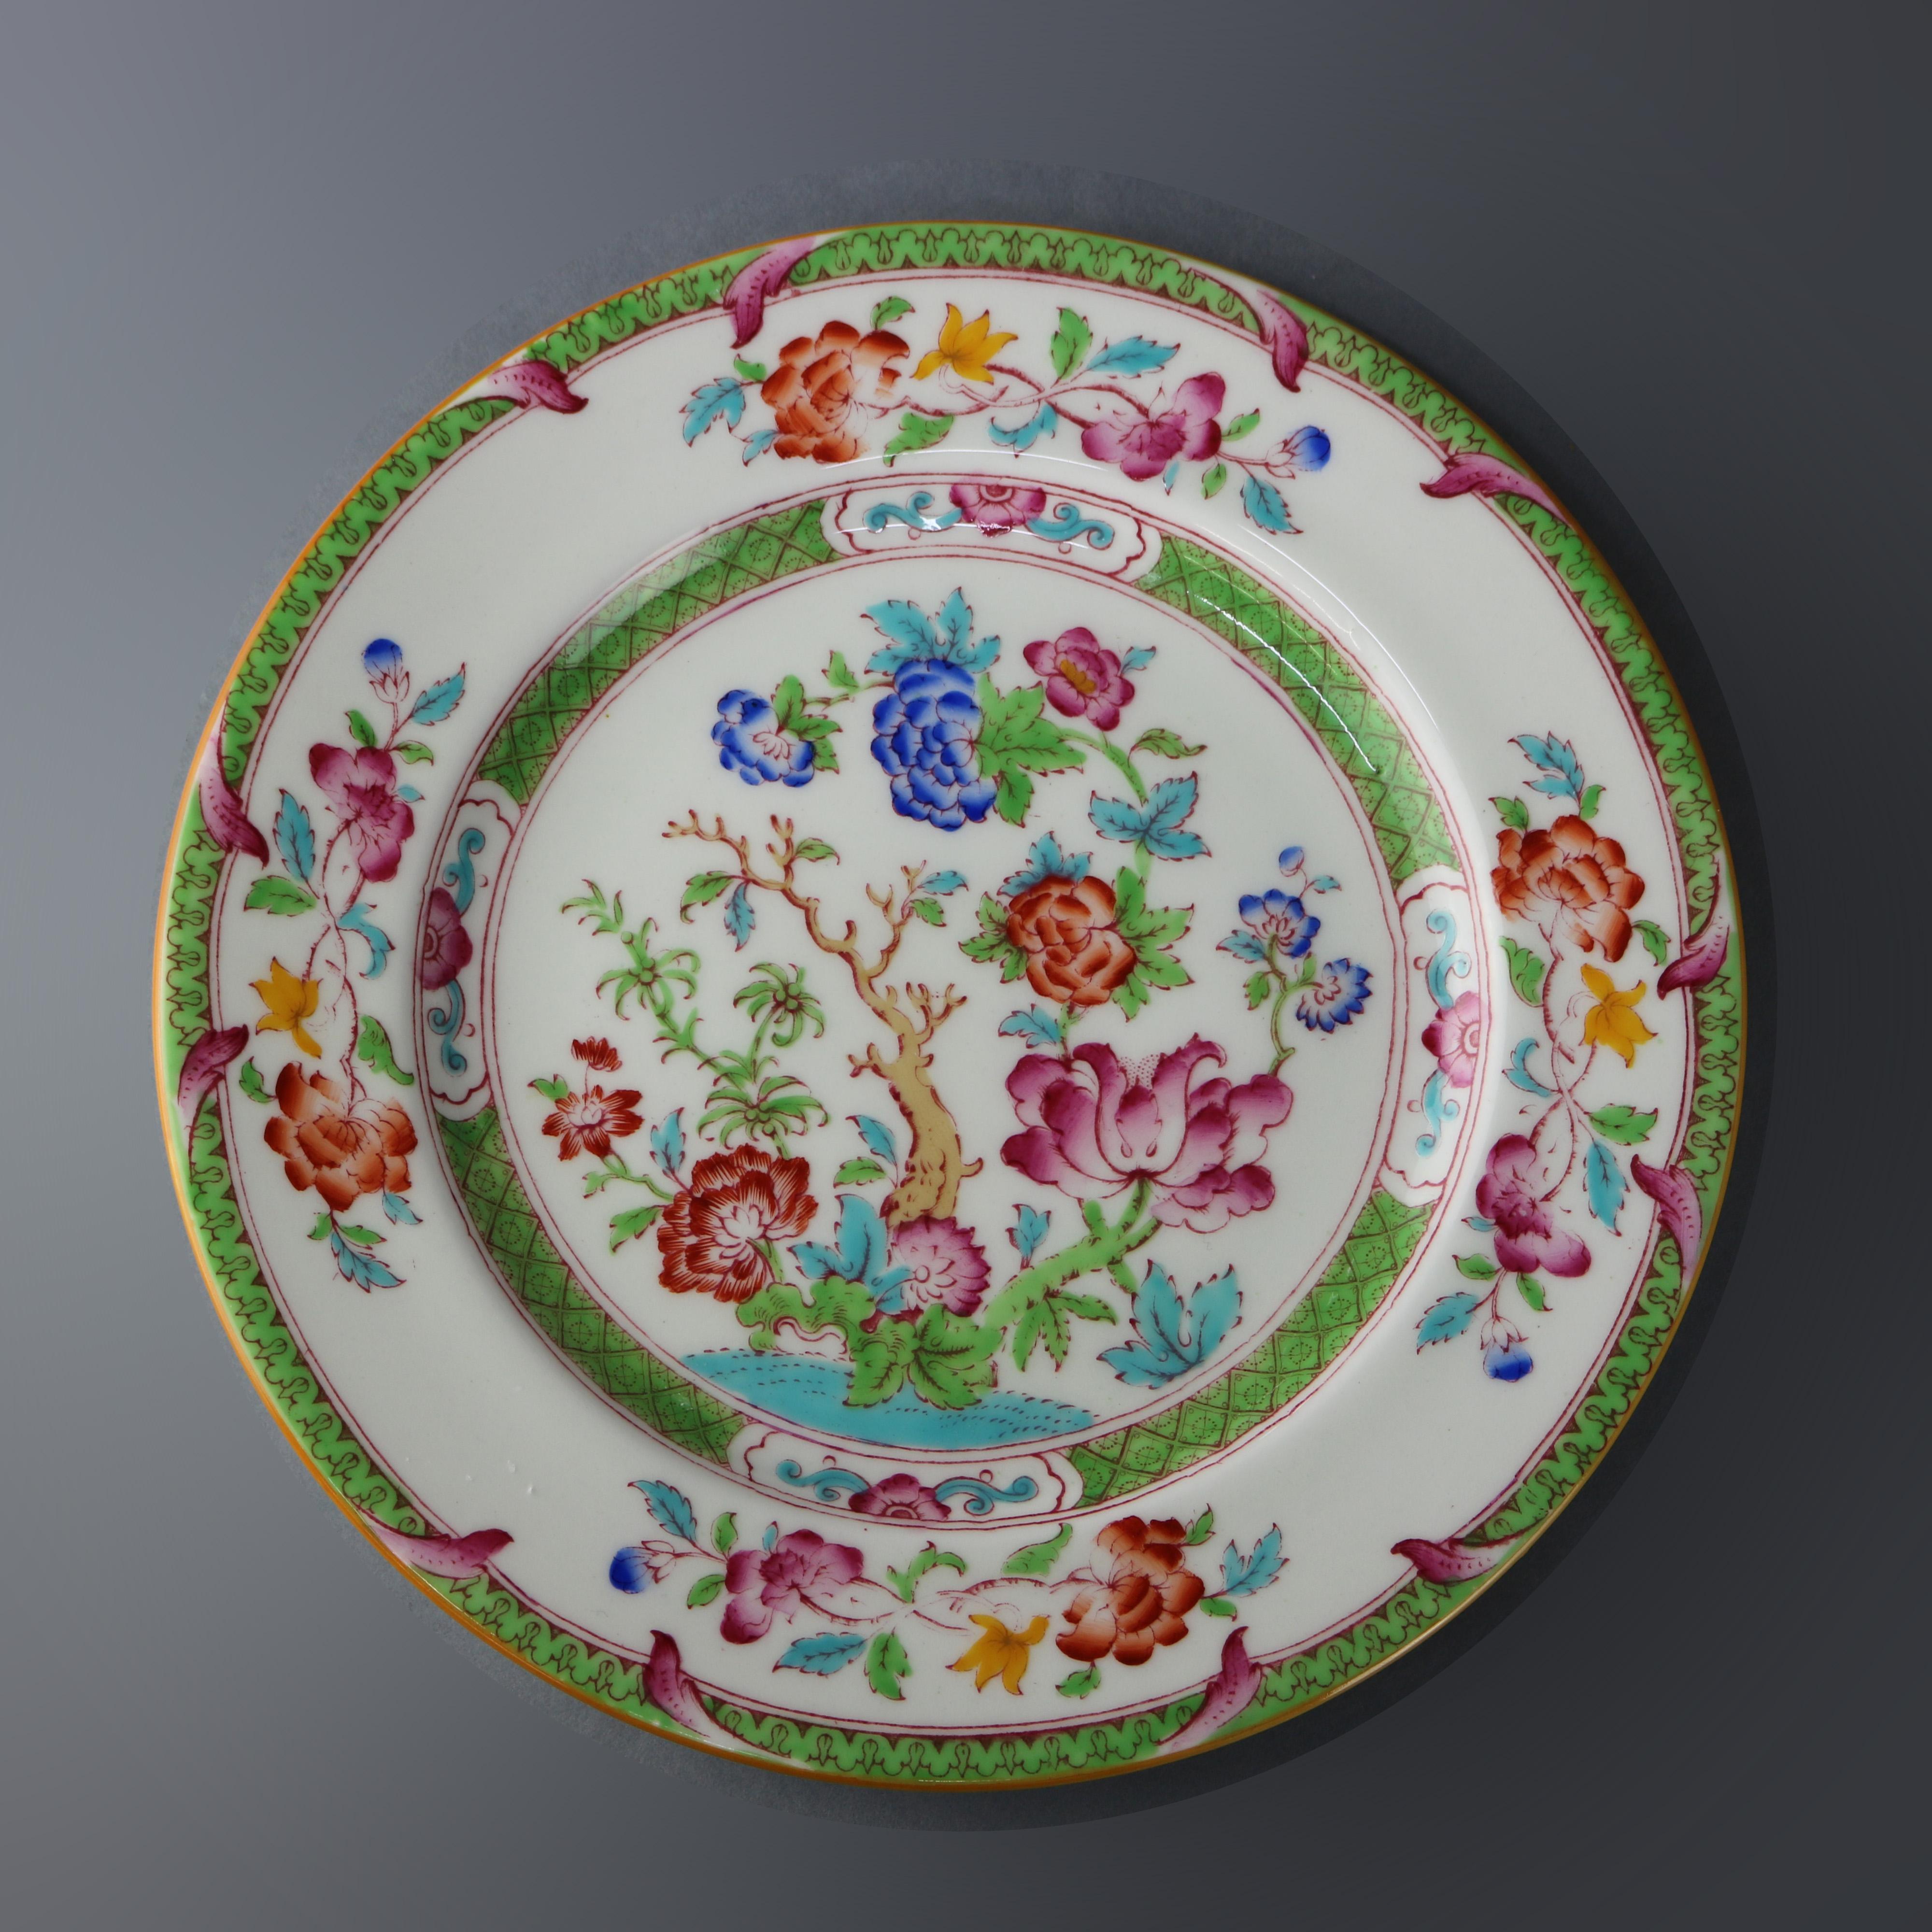 A vintage set of twelve fine china porcelain salad plates by Cauldon, England offer hand painted floral garden decoration with gilt highlights, elements of Aesthetic Movement, en verso maker stamp as photographed, circa 1940.

Measures: 8.75